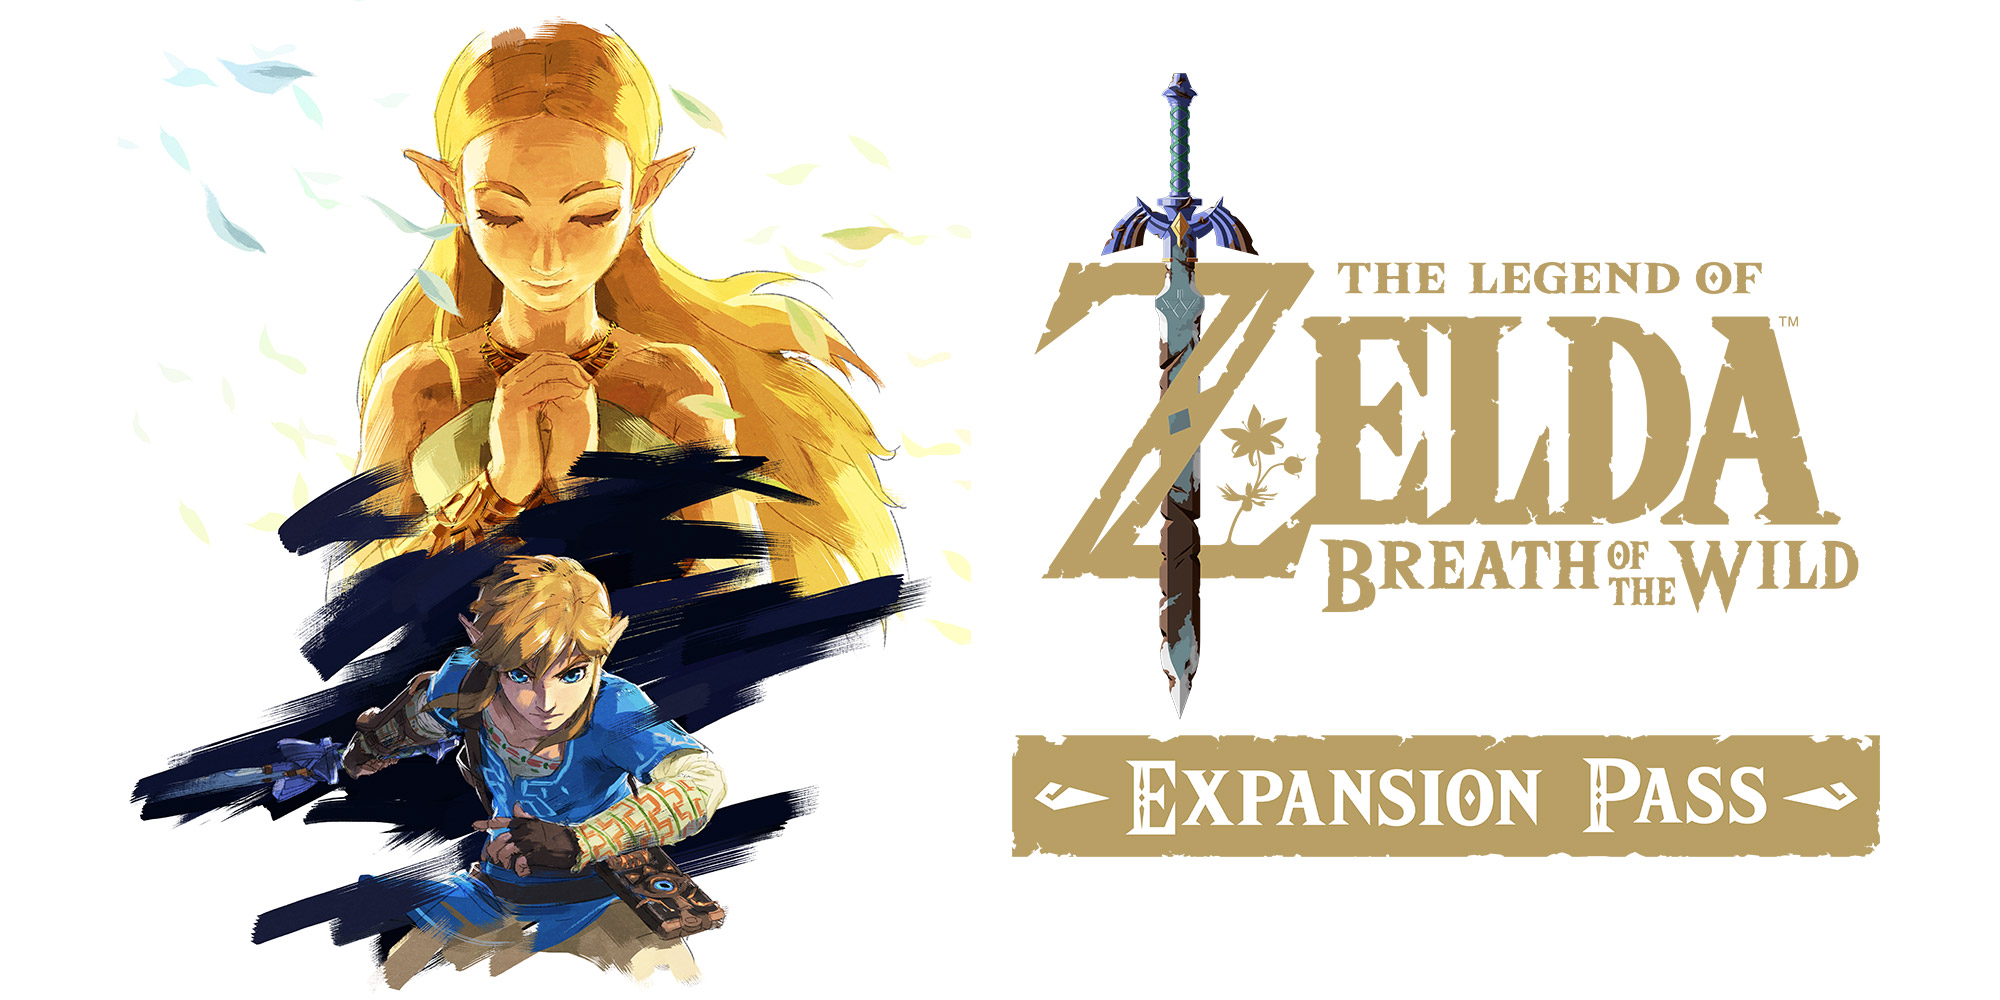 The Legend of Zelda: Breath of the Wild – The Master Trials DLC revealed!